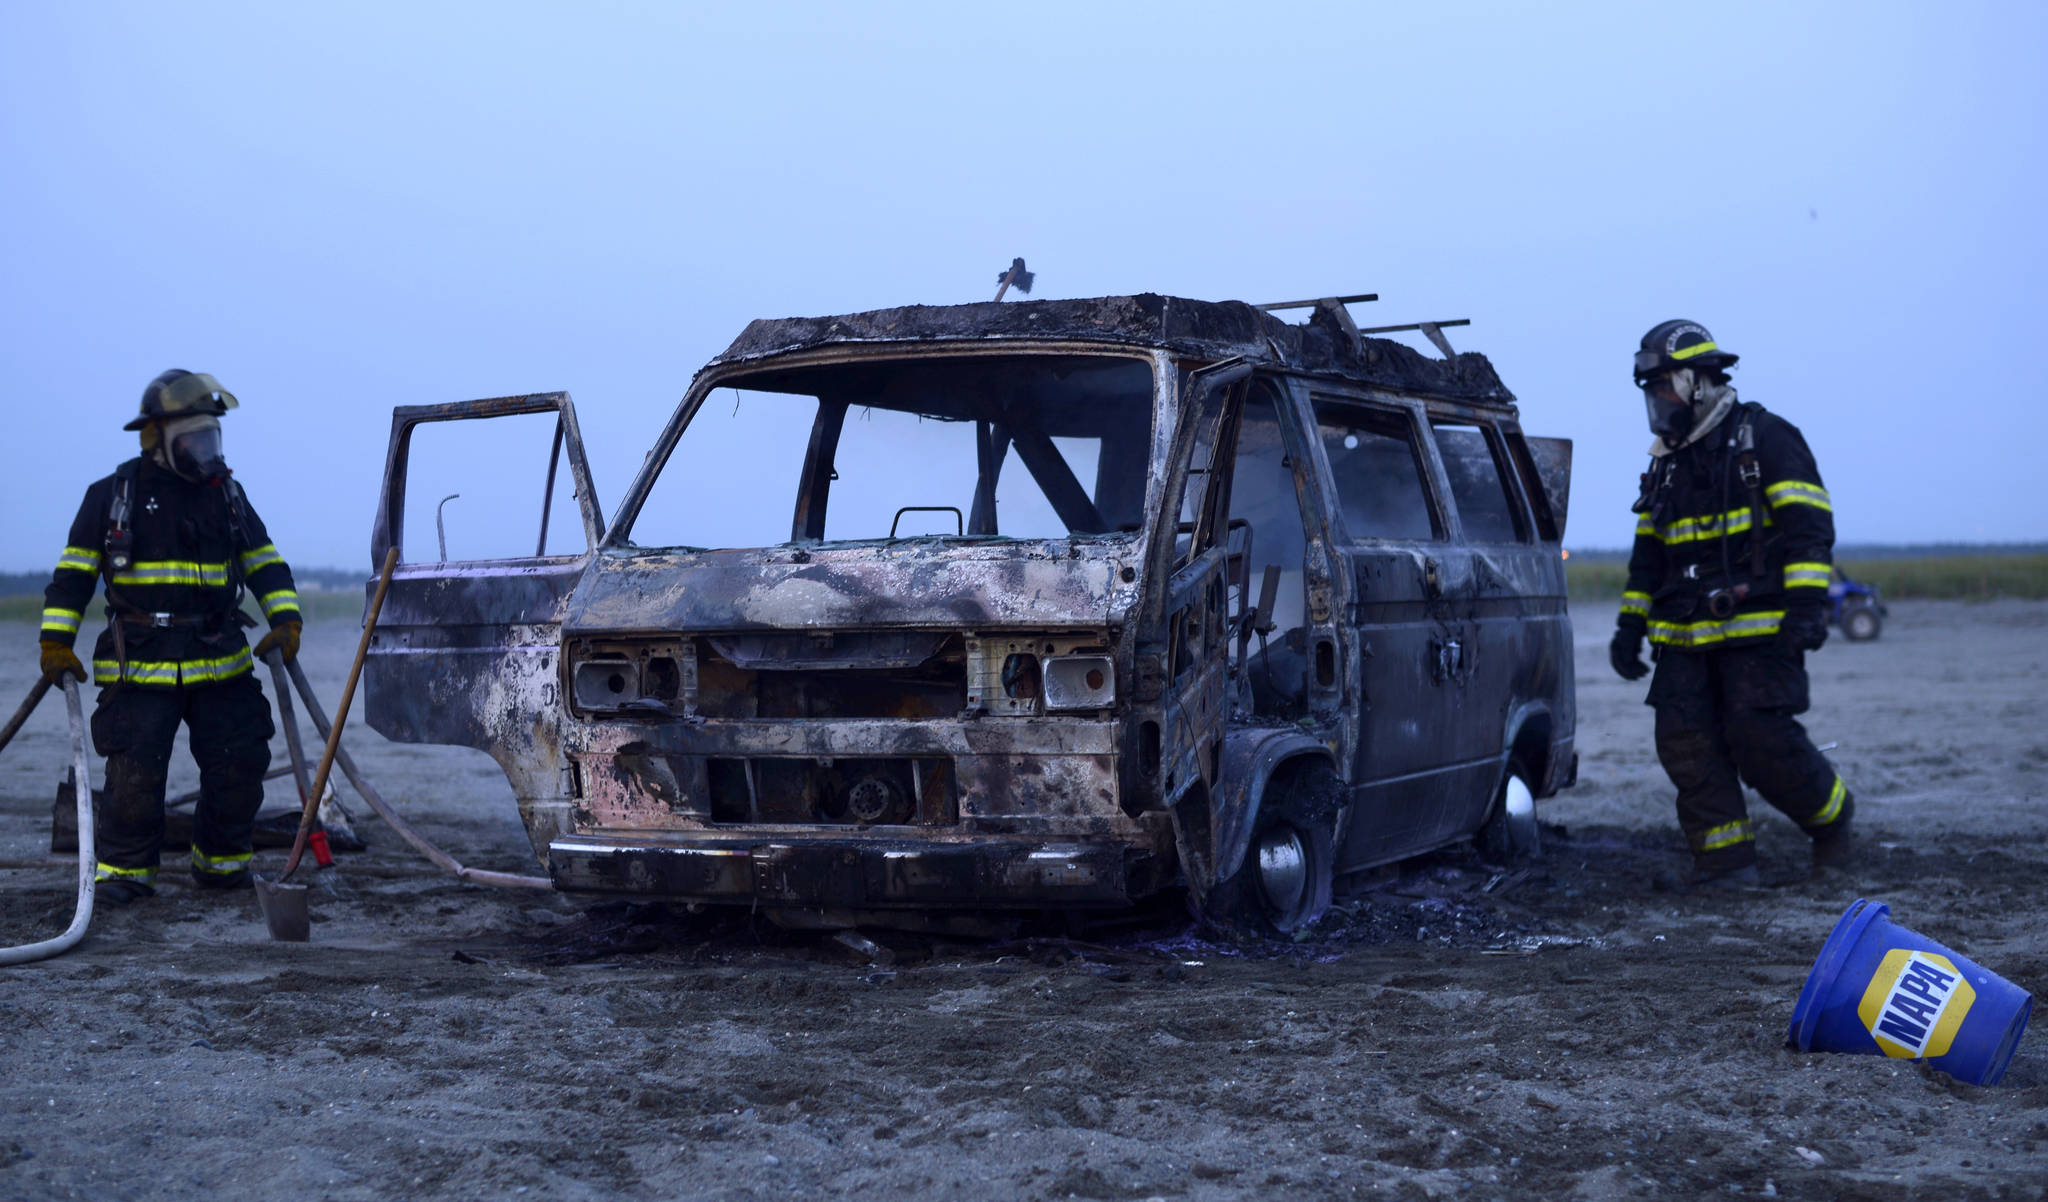 Two Kenai firefighters clean up a 1987 Volkswagen Westfallia camper van that caught fire Thursday, July 13, 2017 on the south beach in Kenai, Alaska. No one was in the van when it burnt, and there were no injuries. (Photo by Ben Boettger/Peninsula Clarion)